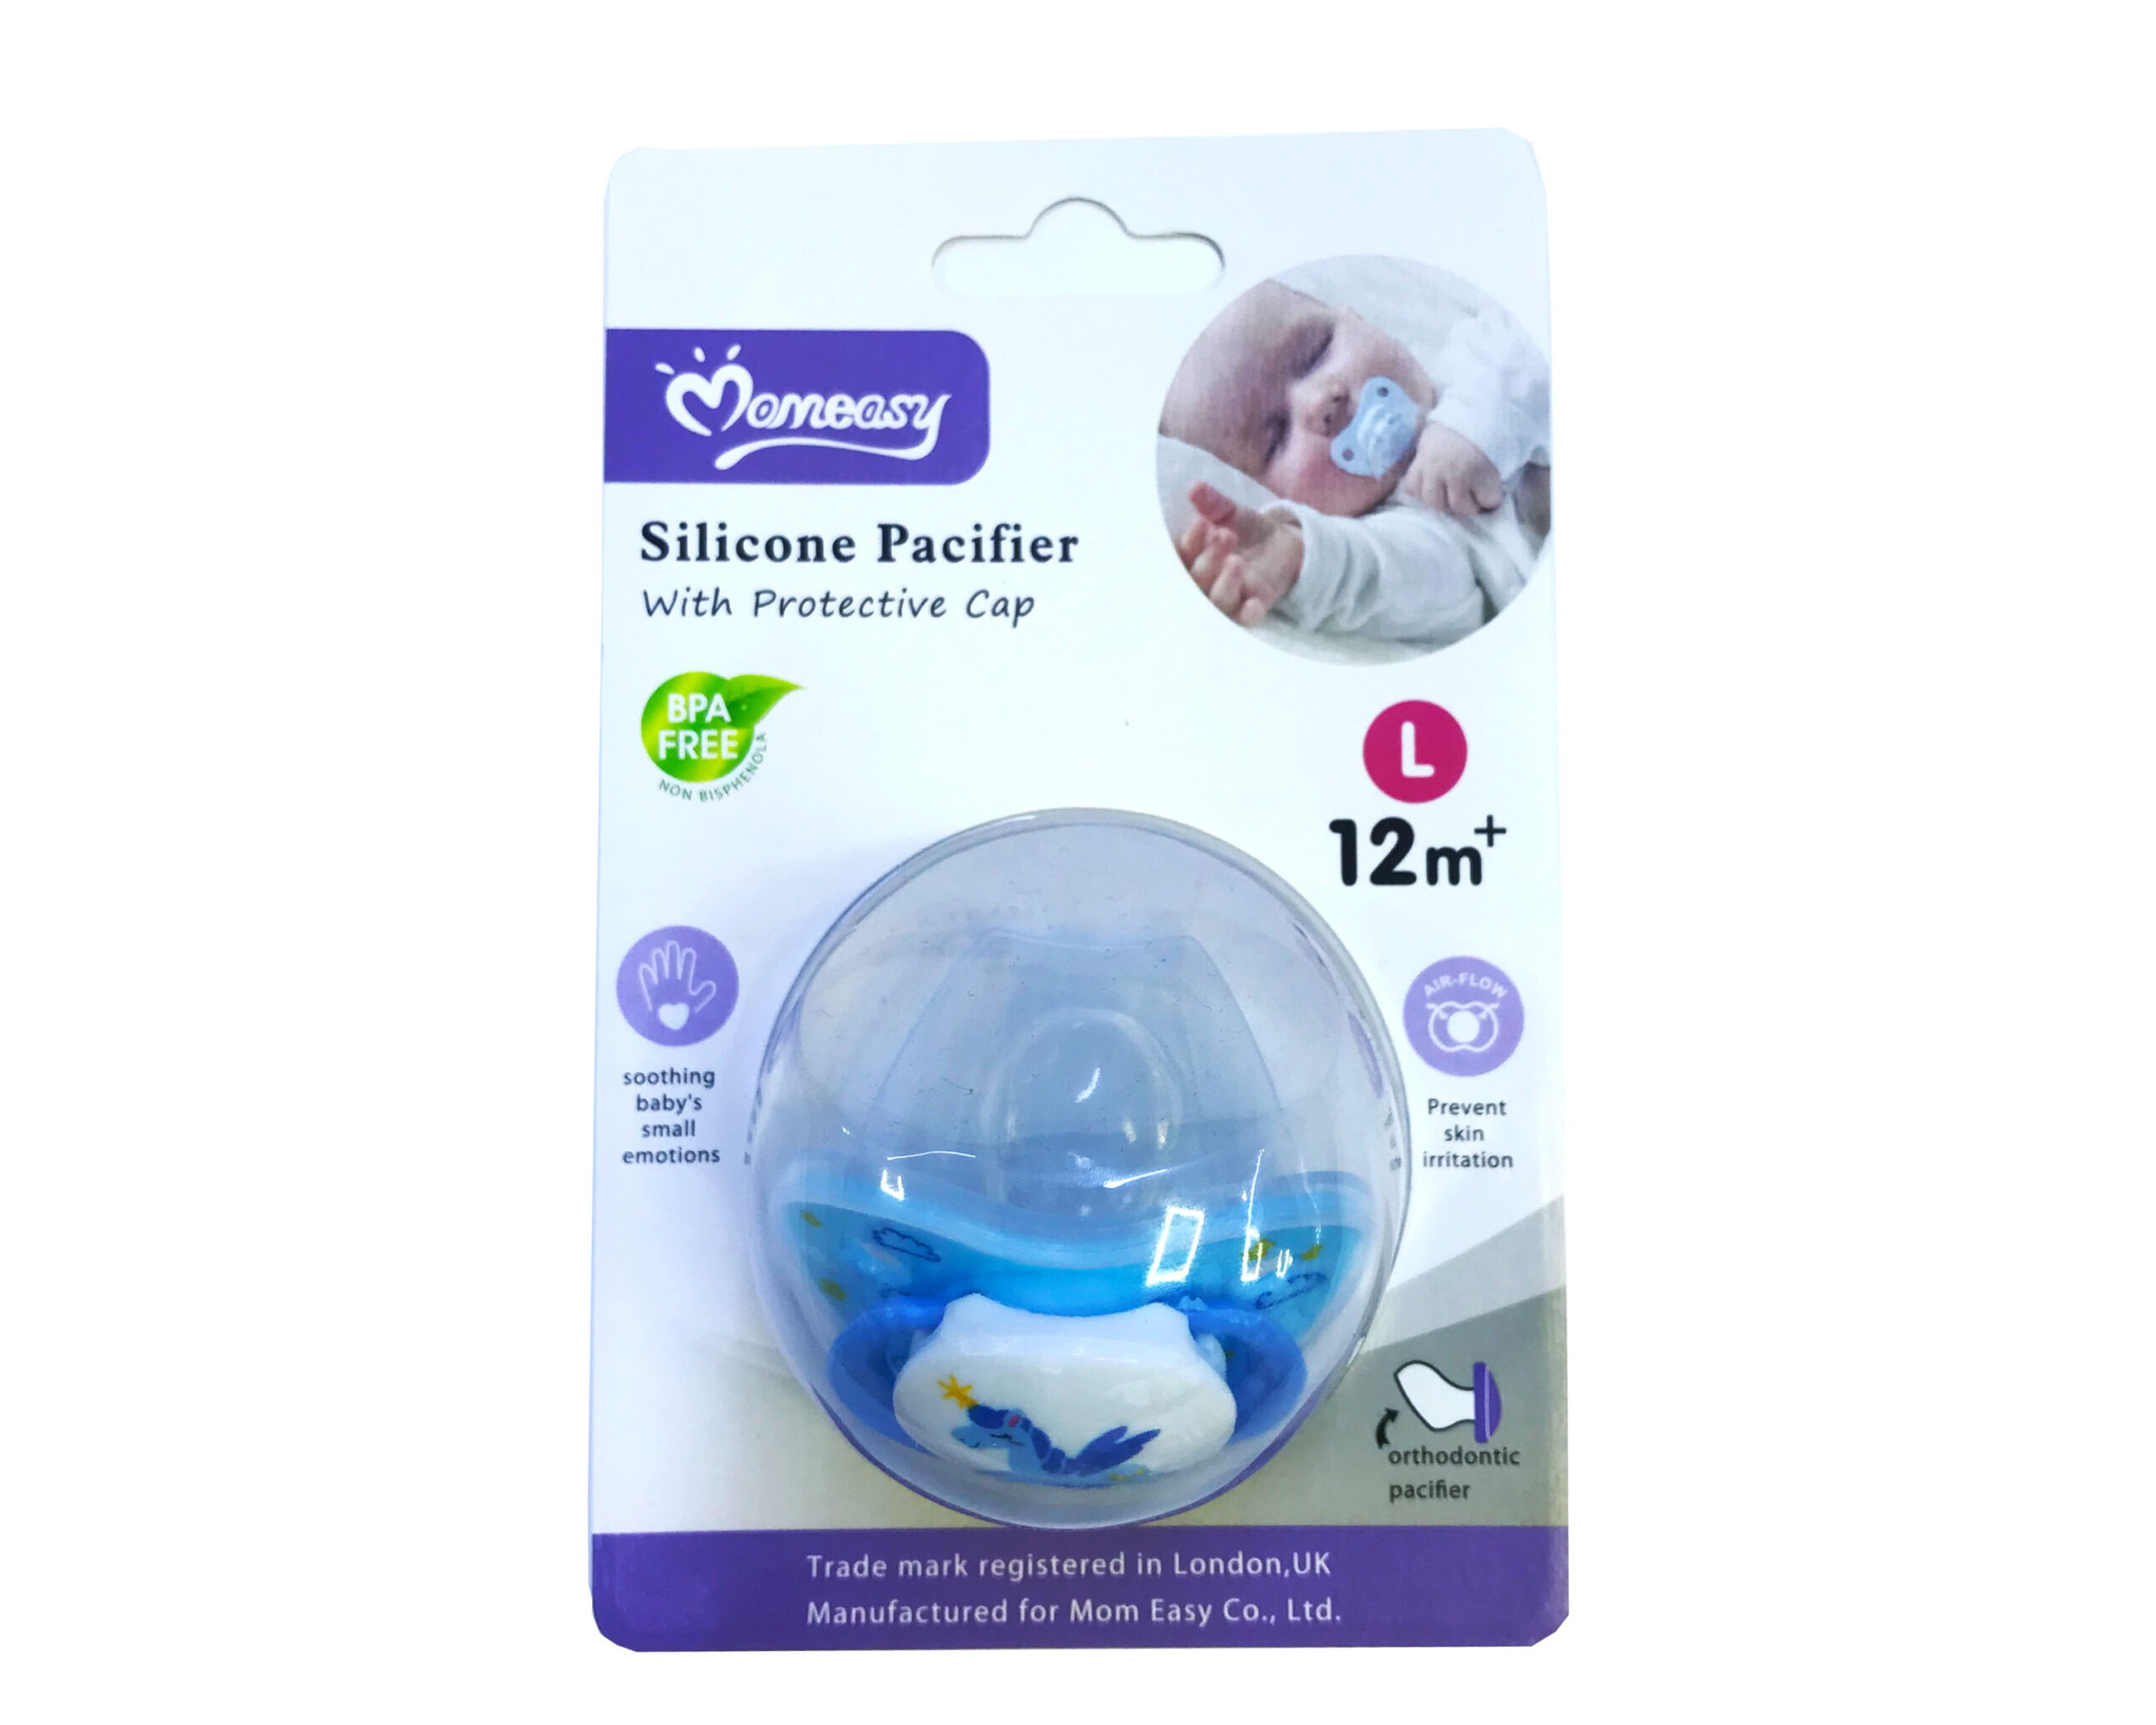 Sucette Momeasy 12m+ Type orthodontique – Blue